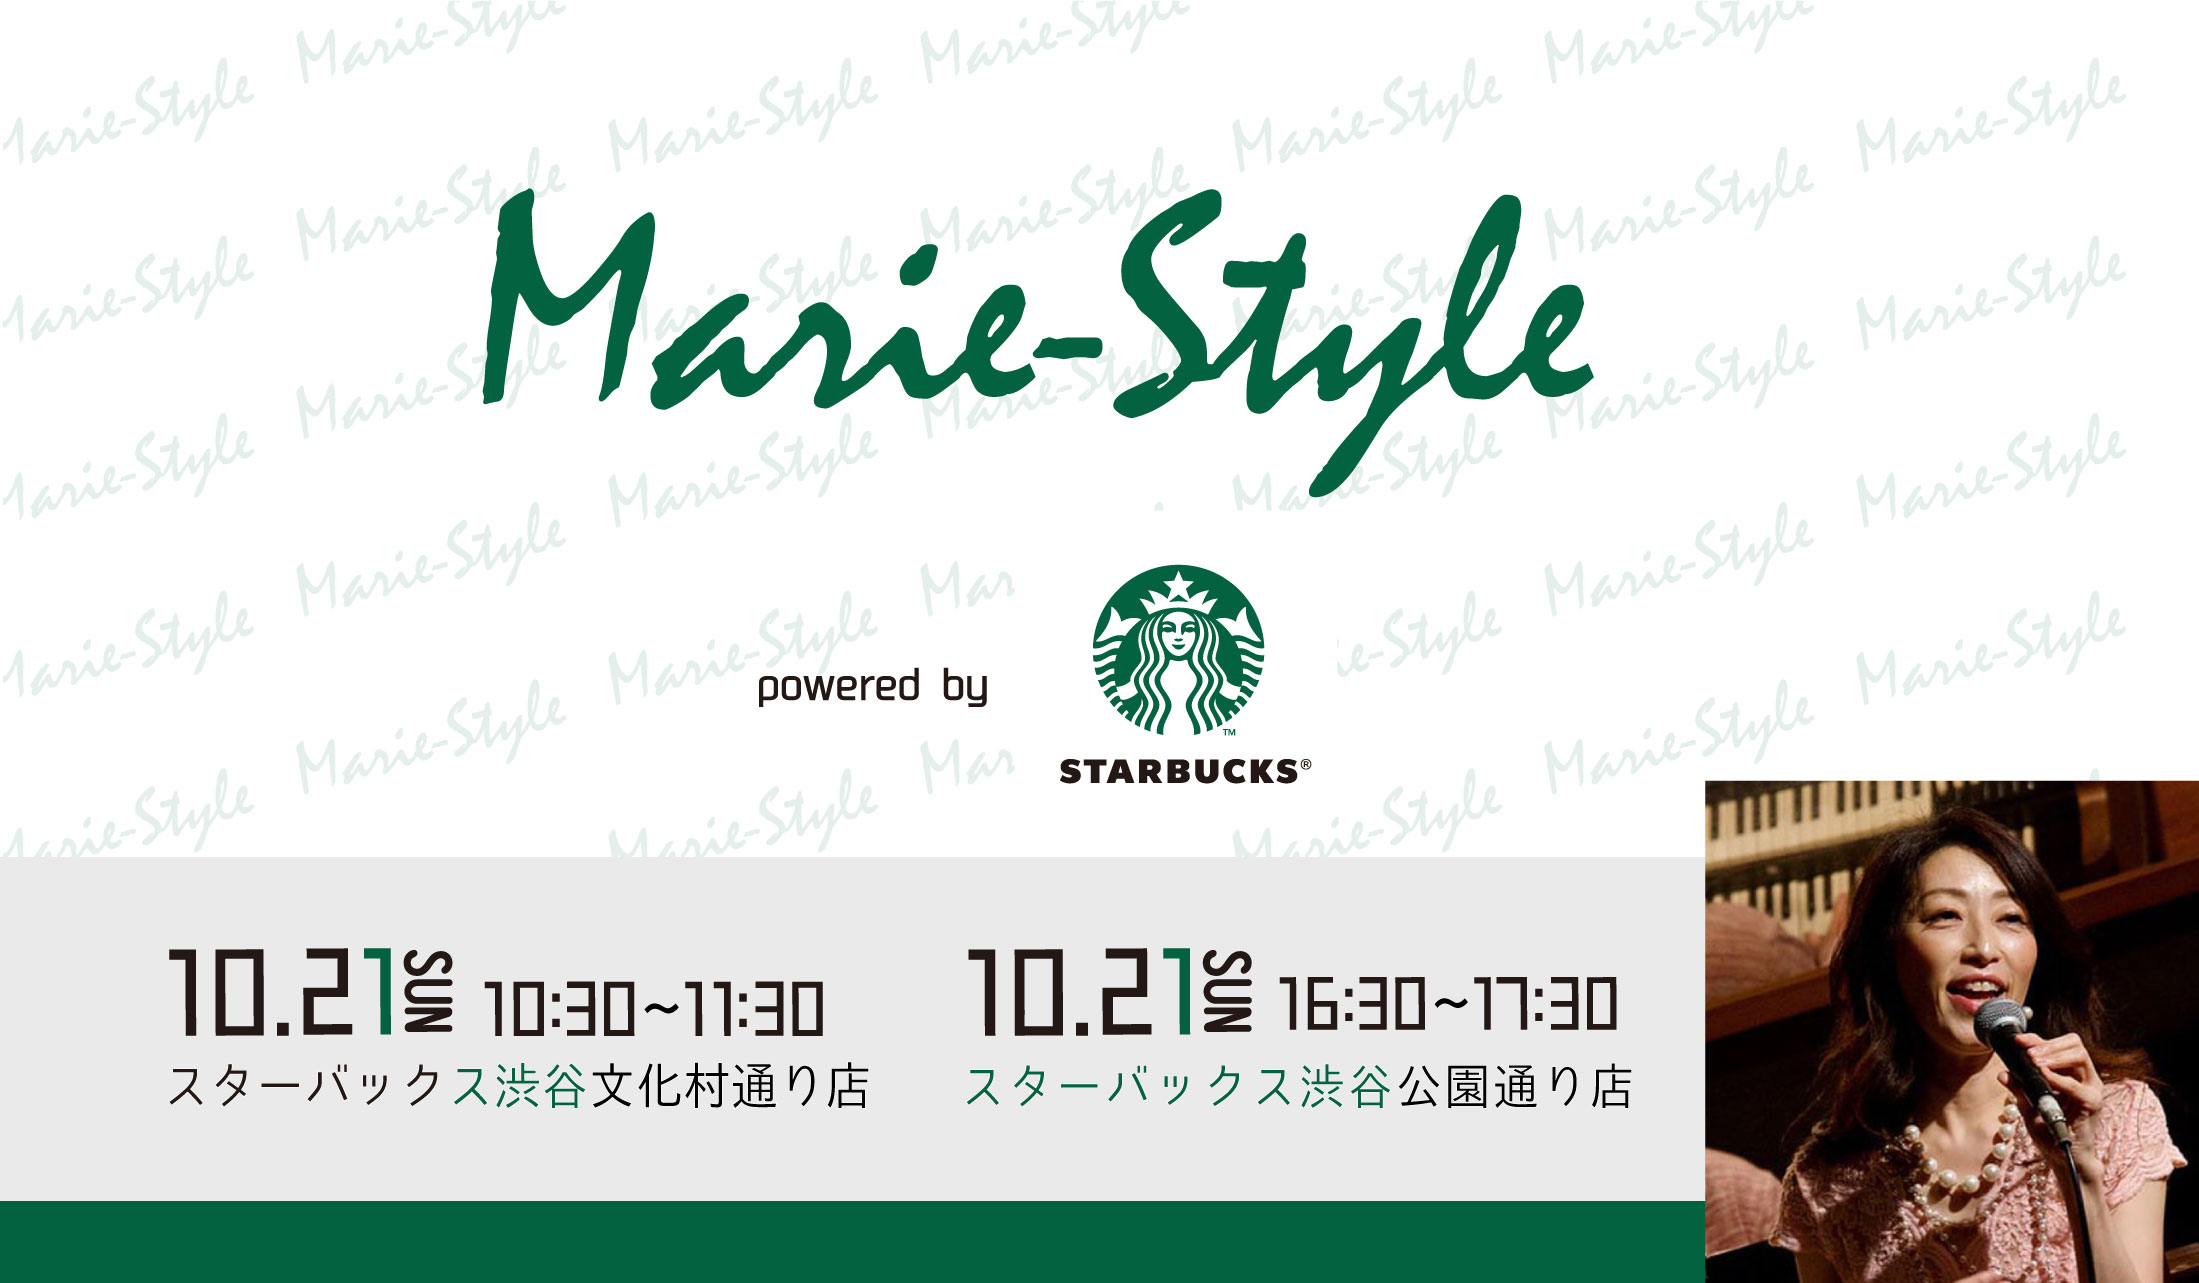 Marie-Style powered by STARBUCKS®